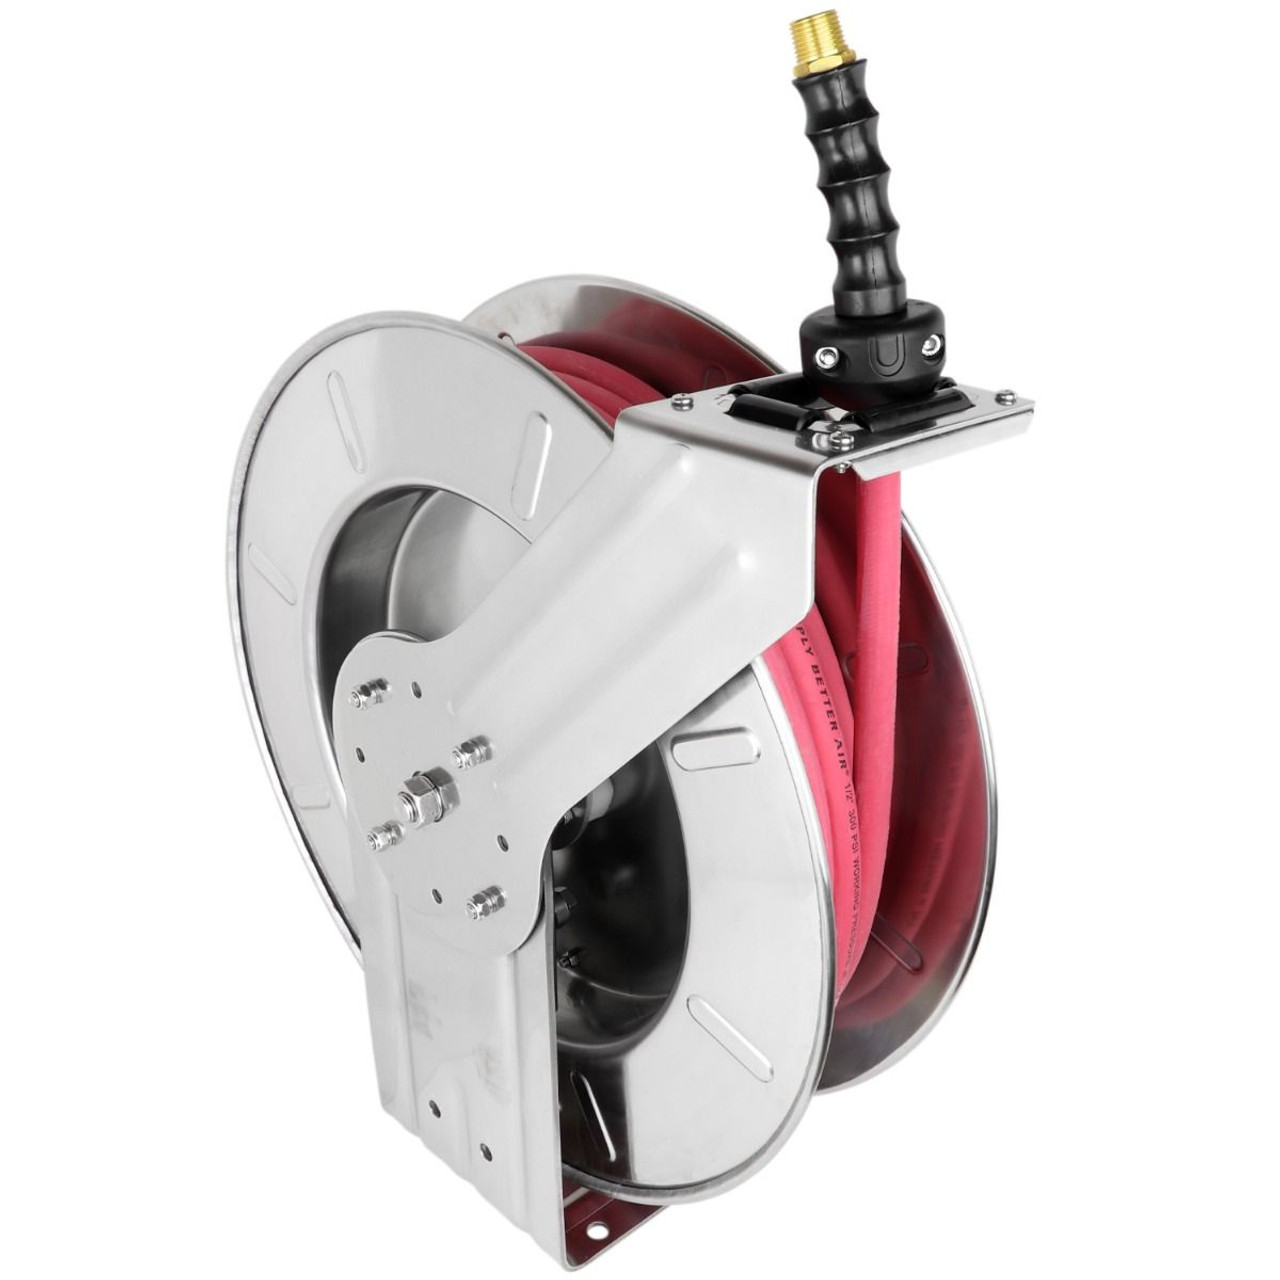 Milton? Industrial Stainless Steel Hose Reel Retractable, 3/8" ID x 50' Ultra-Lightweight Rubber hose w/ 3/8" NPT, 300 PSI